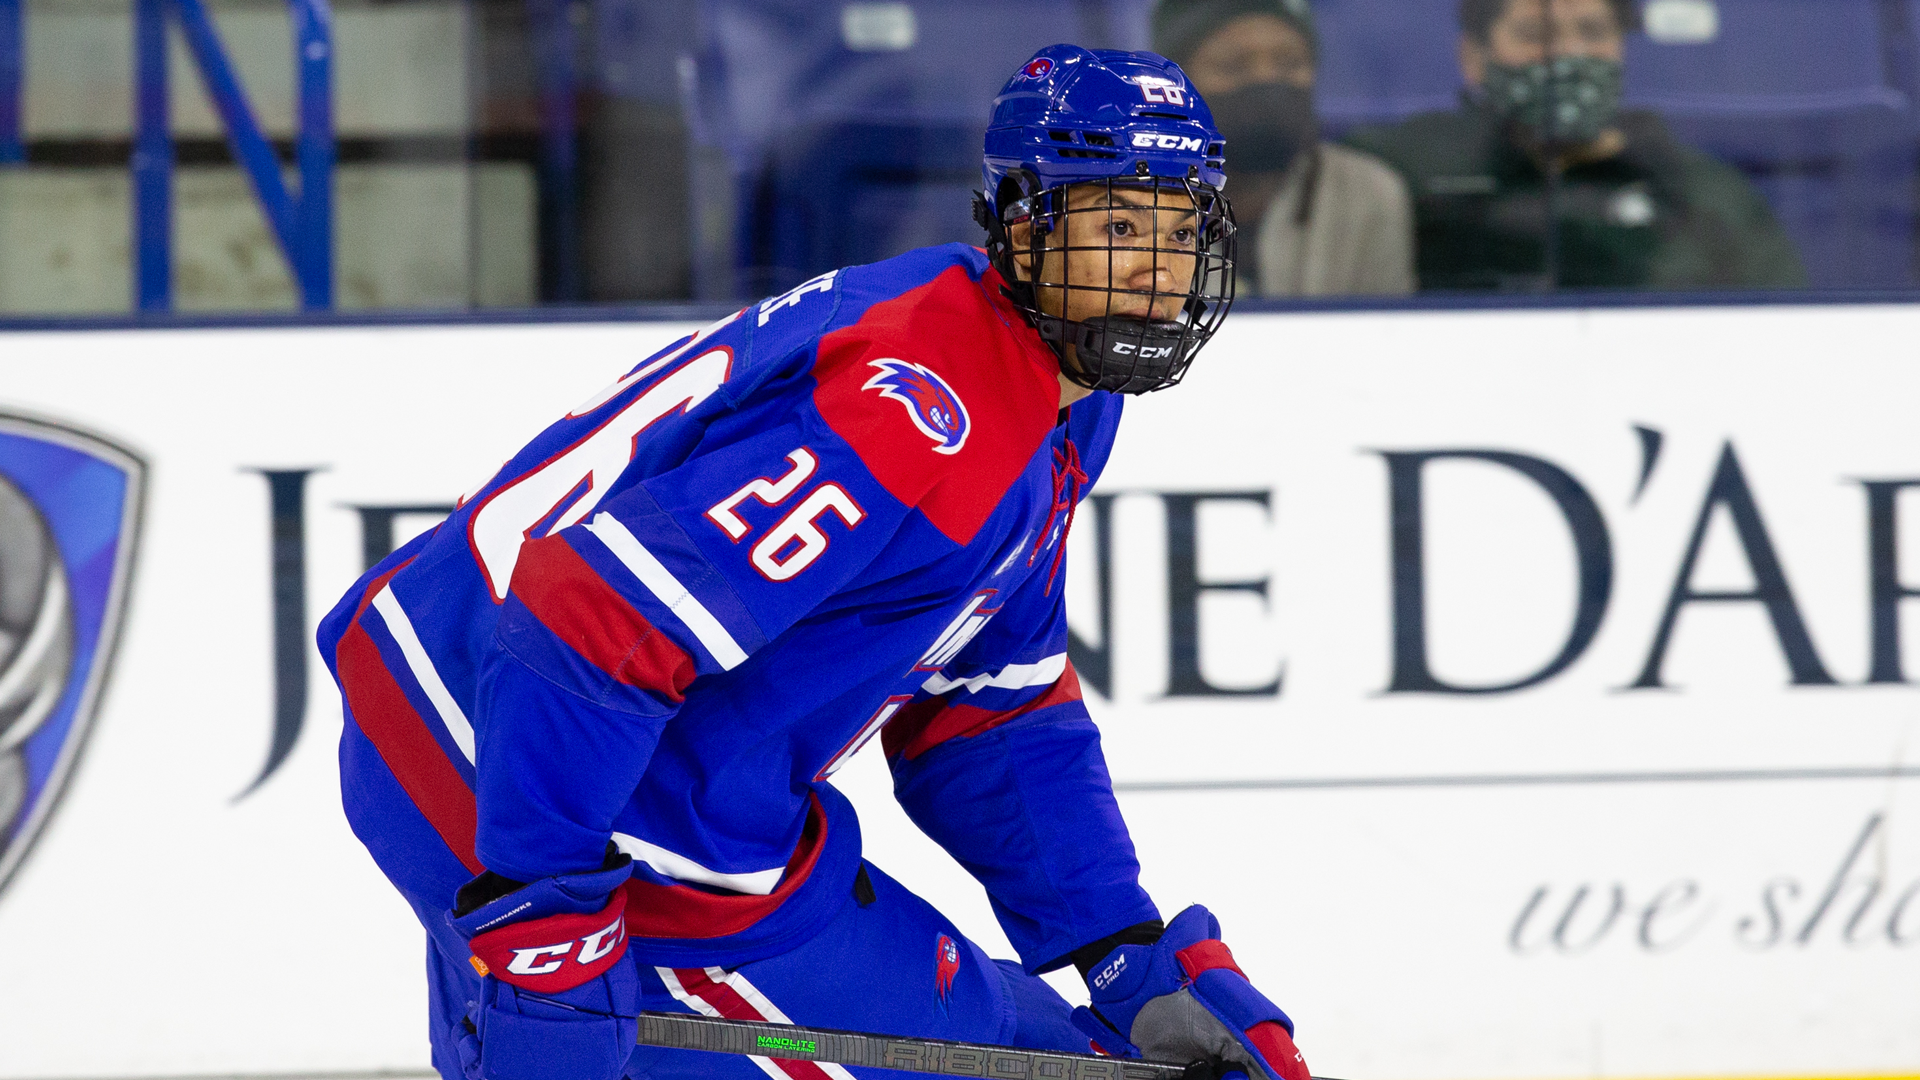 UMass Lowell's Lee signs NHL deal with Kings, gives up senior year with  River Hawks - College Hockey 